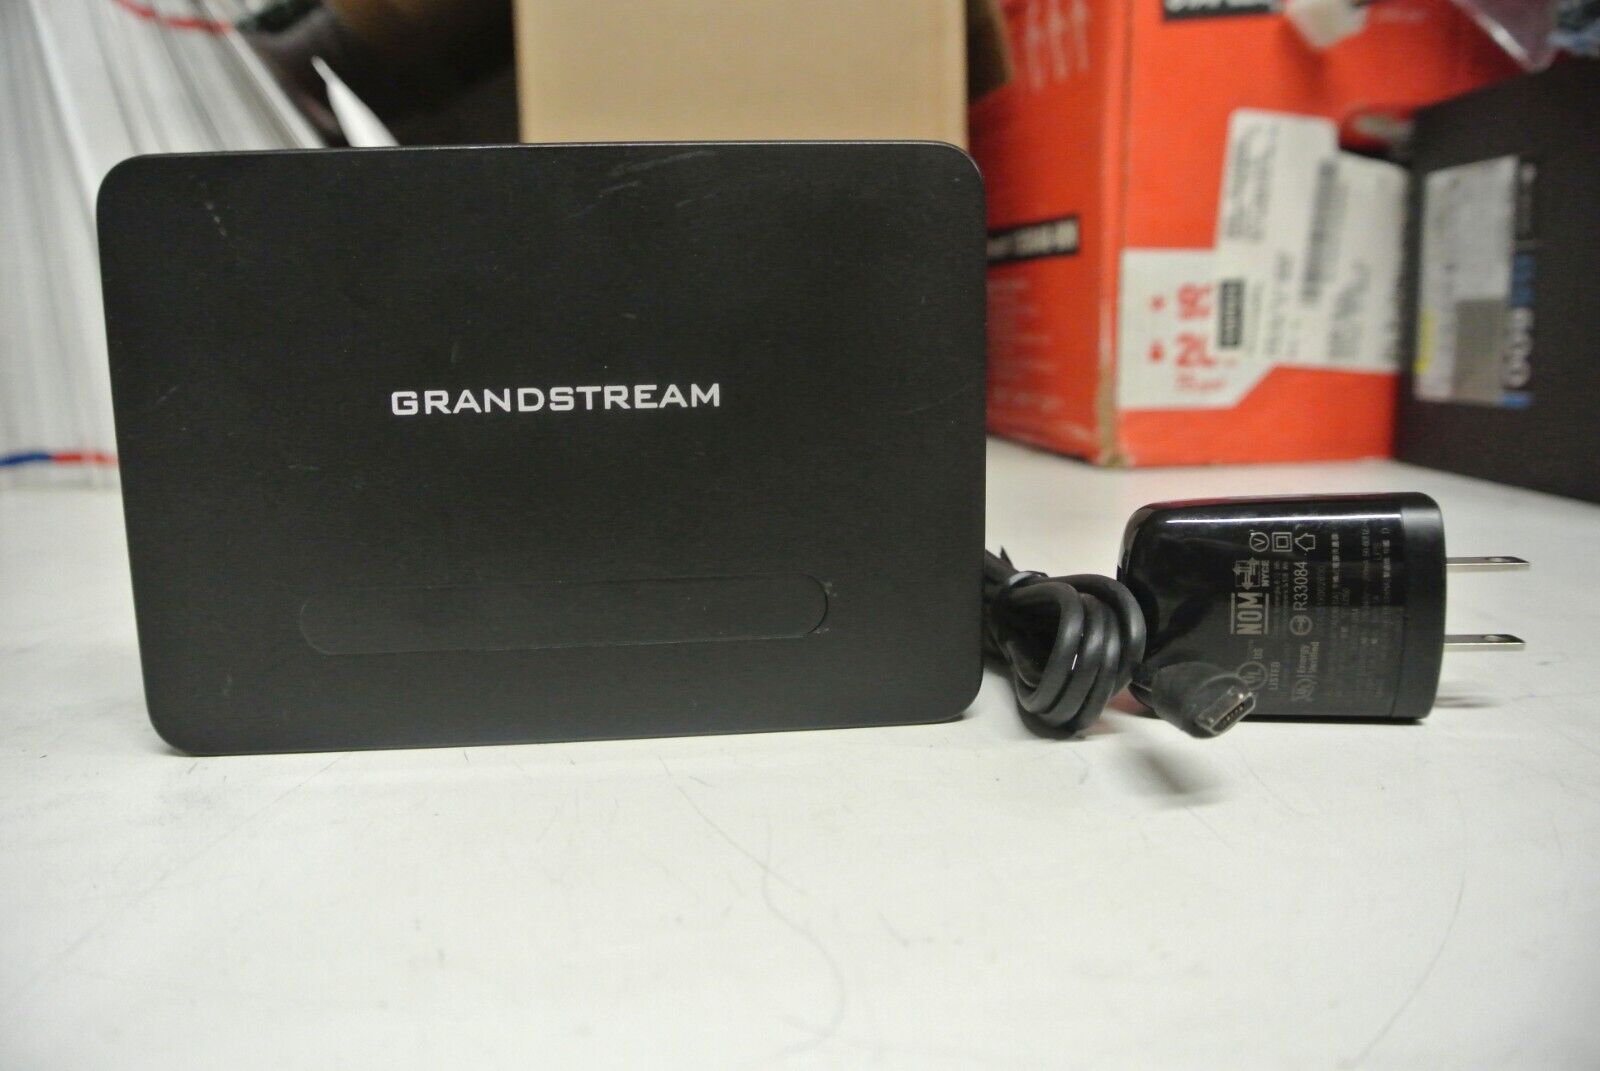 Grandstream DP750 DECT VoIP Base Station Pair up to 5 DP720's W/POWER ADAPTER